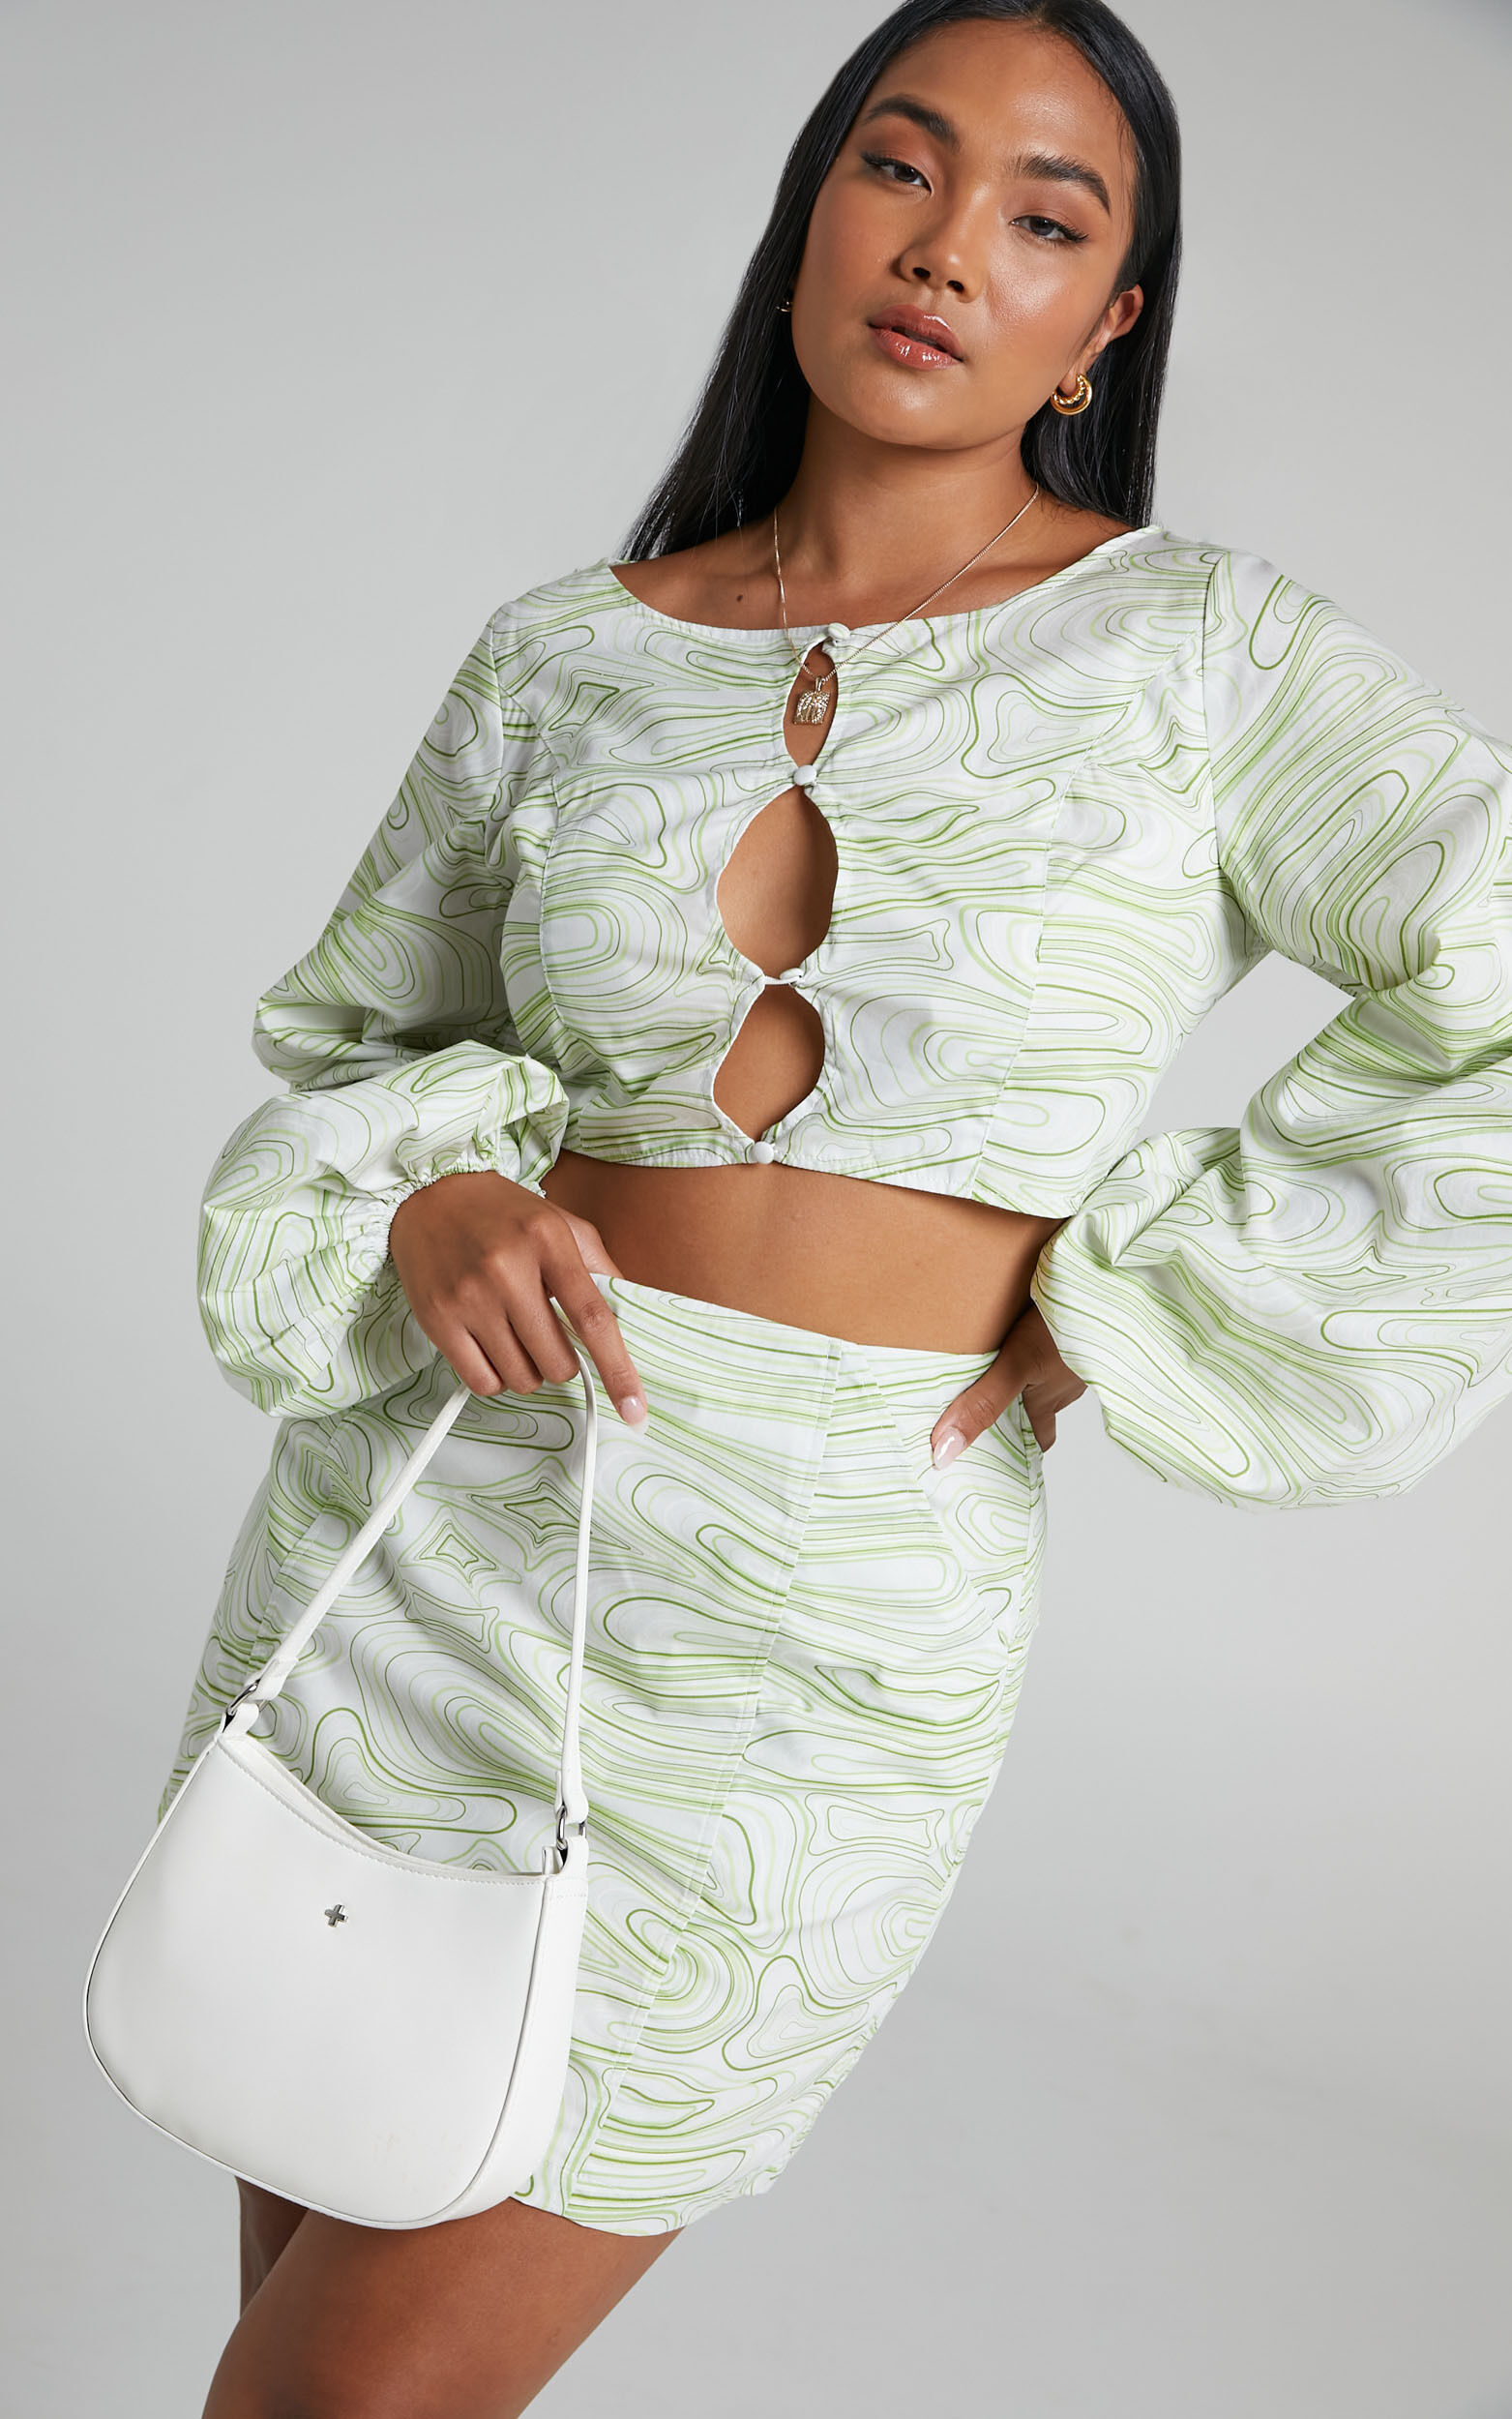 Charlie Holiday - Pricilla Top in Abstract Wave - L, GRN1